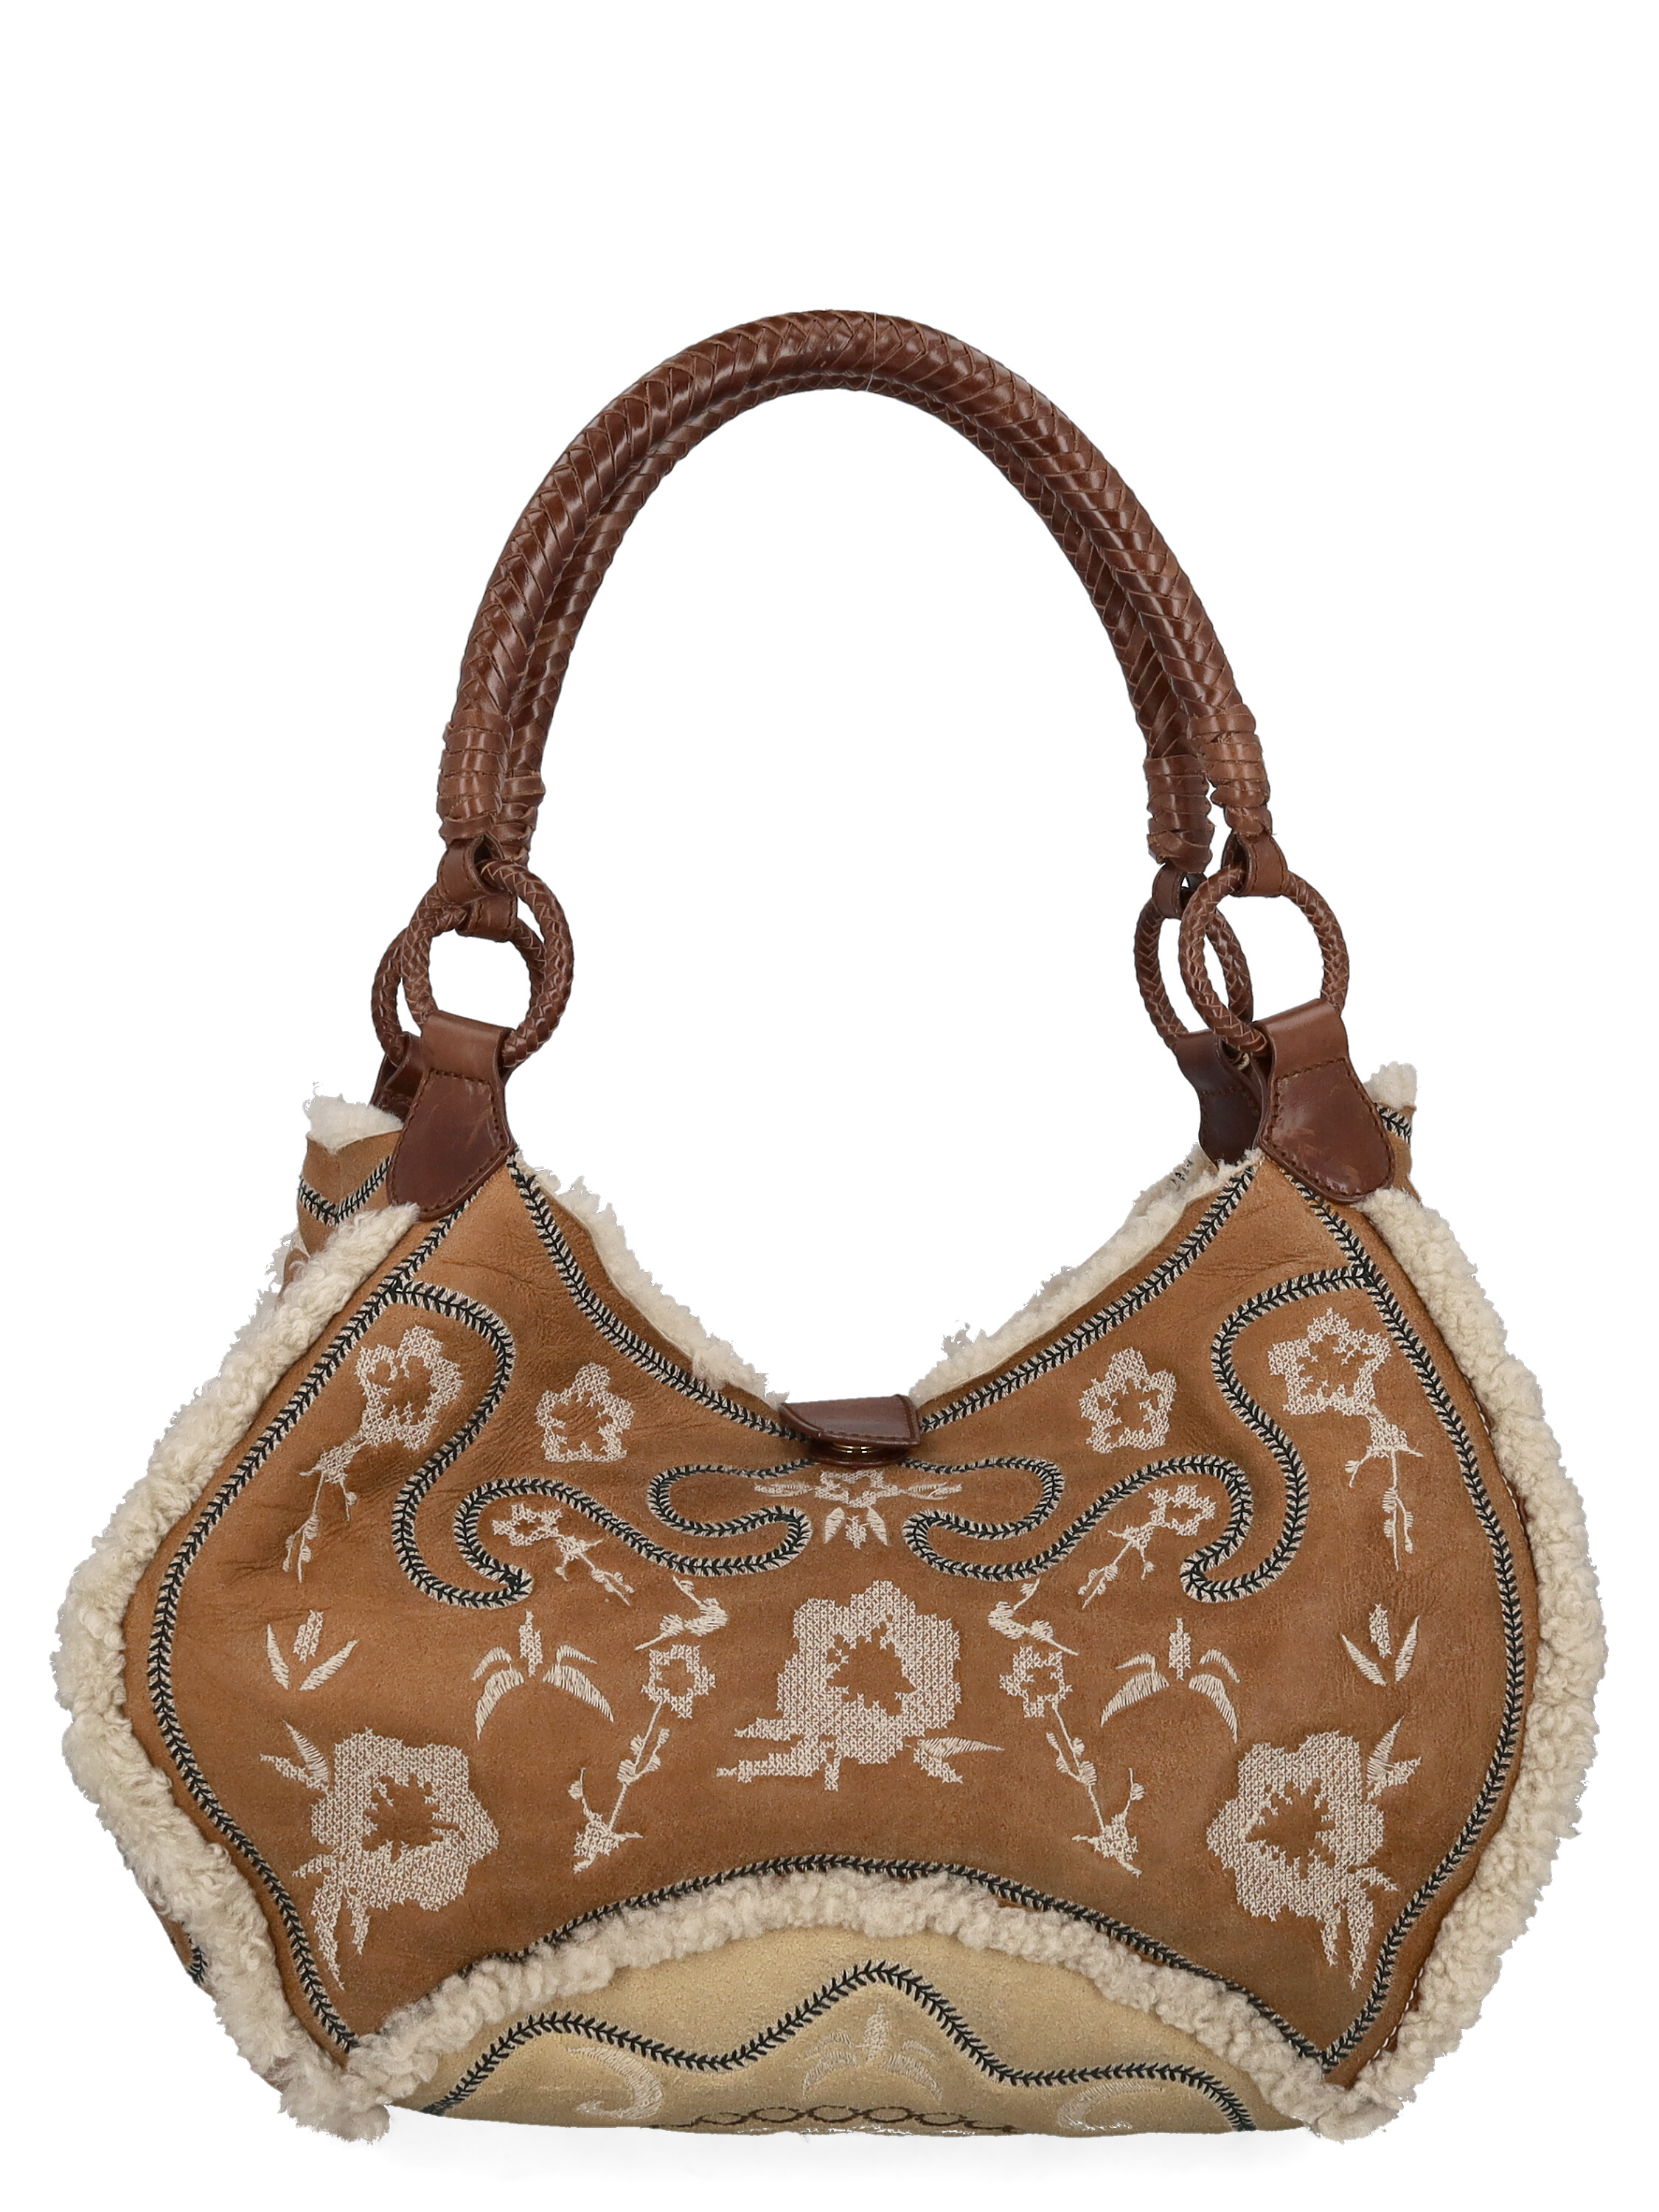 Condition: Good, Other Patterns Leather, Color: Beige, Brown -  -  -